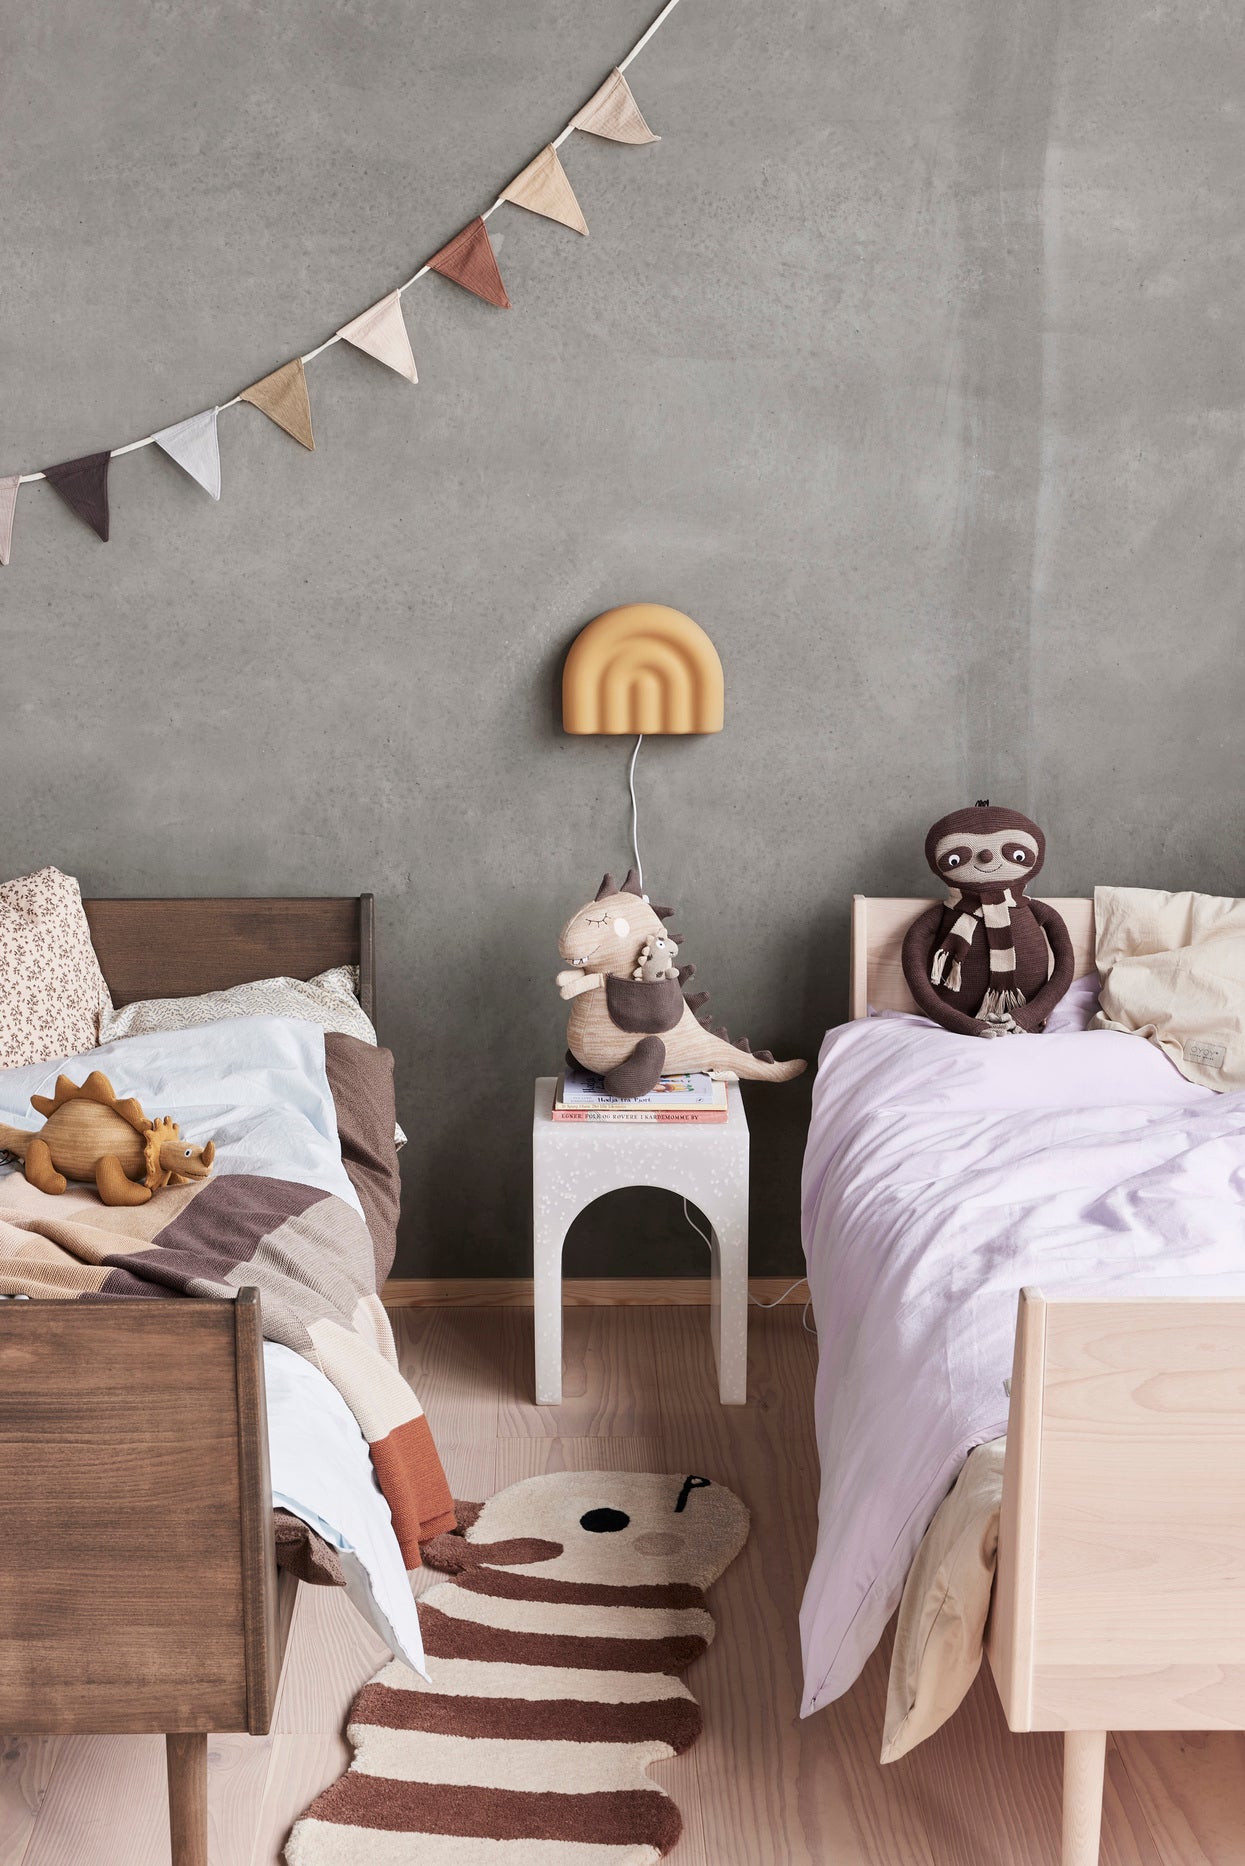 Load image into Gallery viewer, OYOY MINI Nuku Bedding - Baby Bedding
